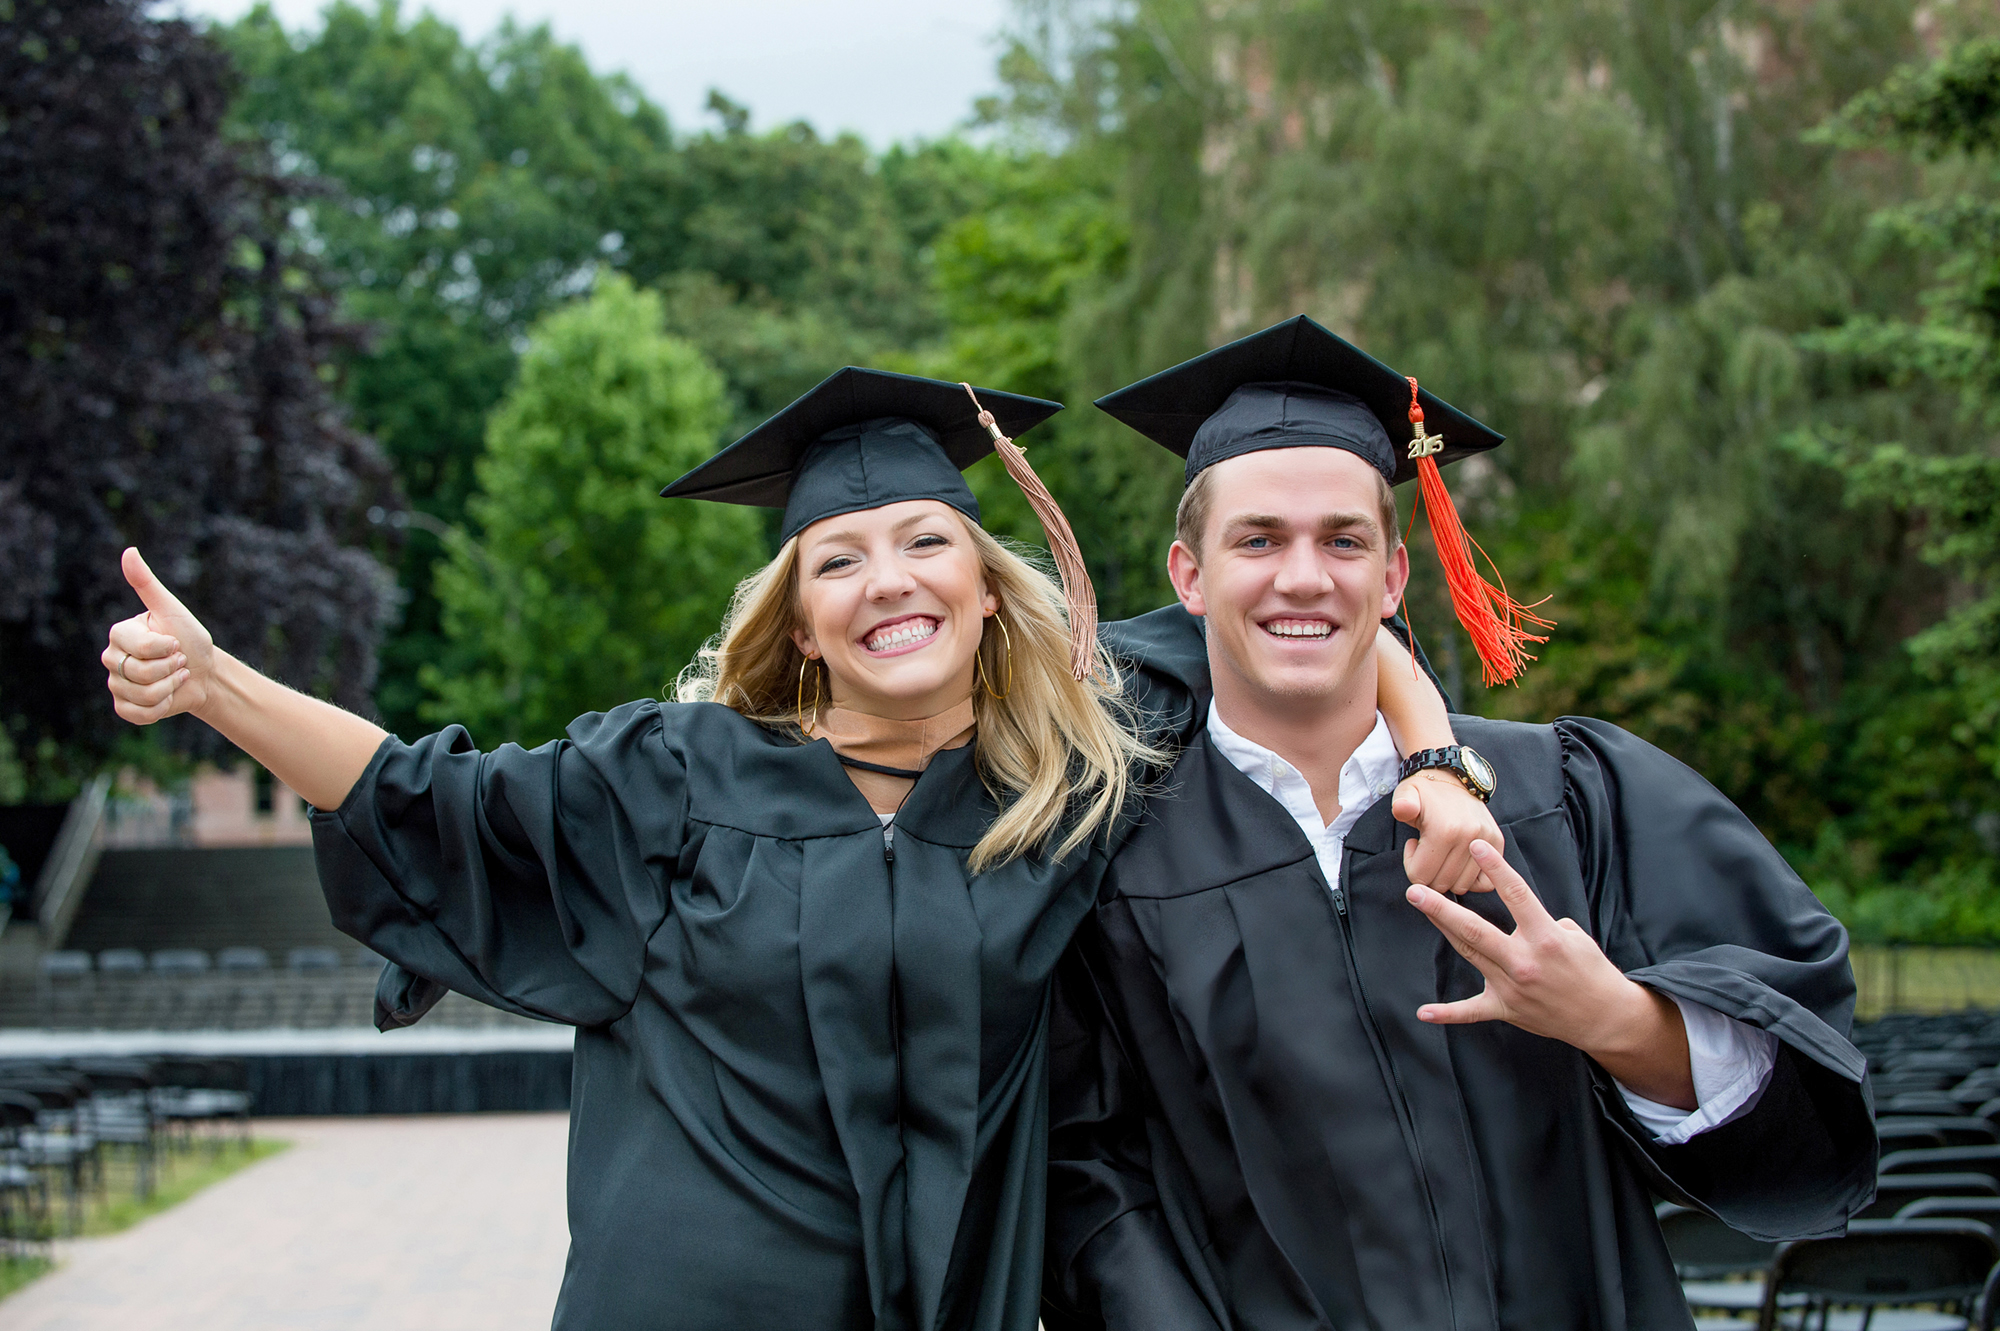 Anita Nowacka photo of sister and brother during graduation date